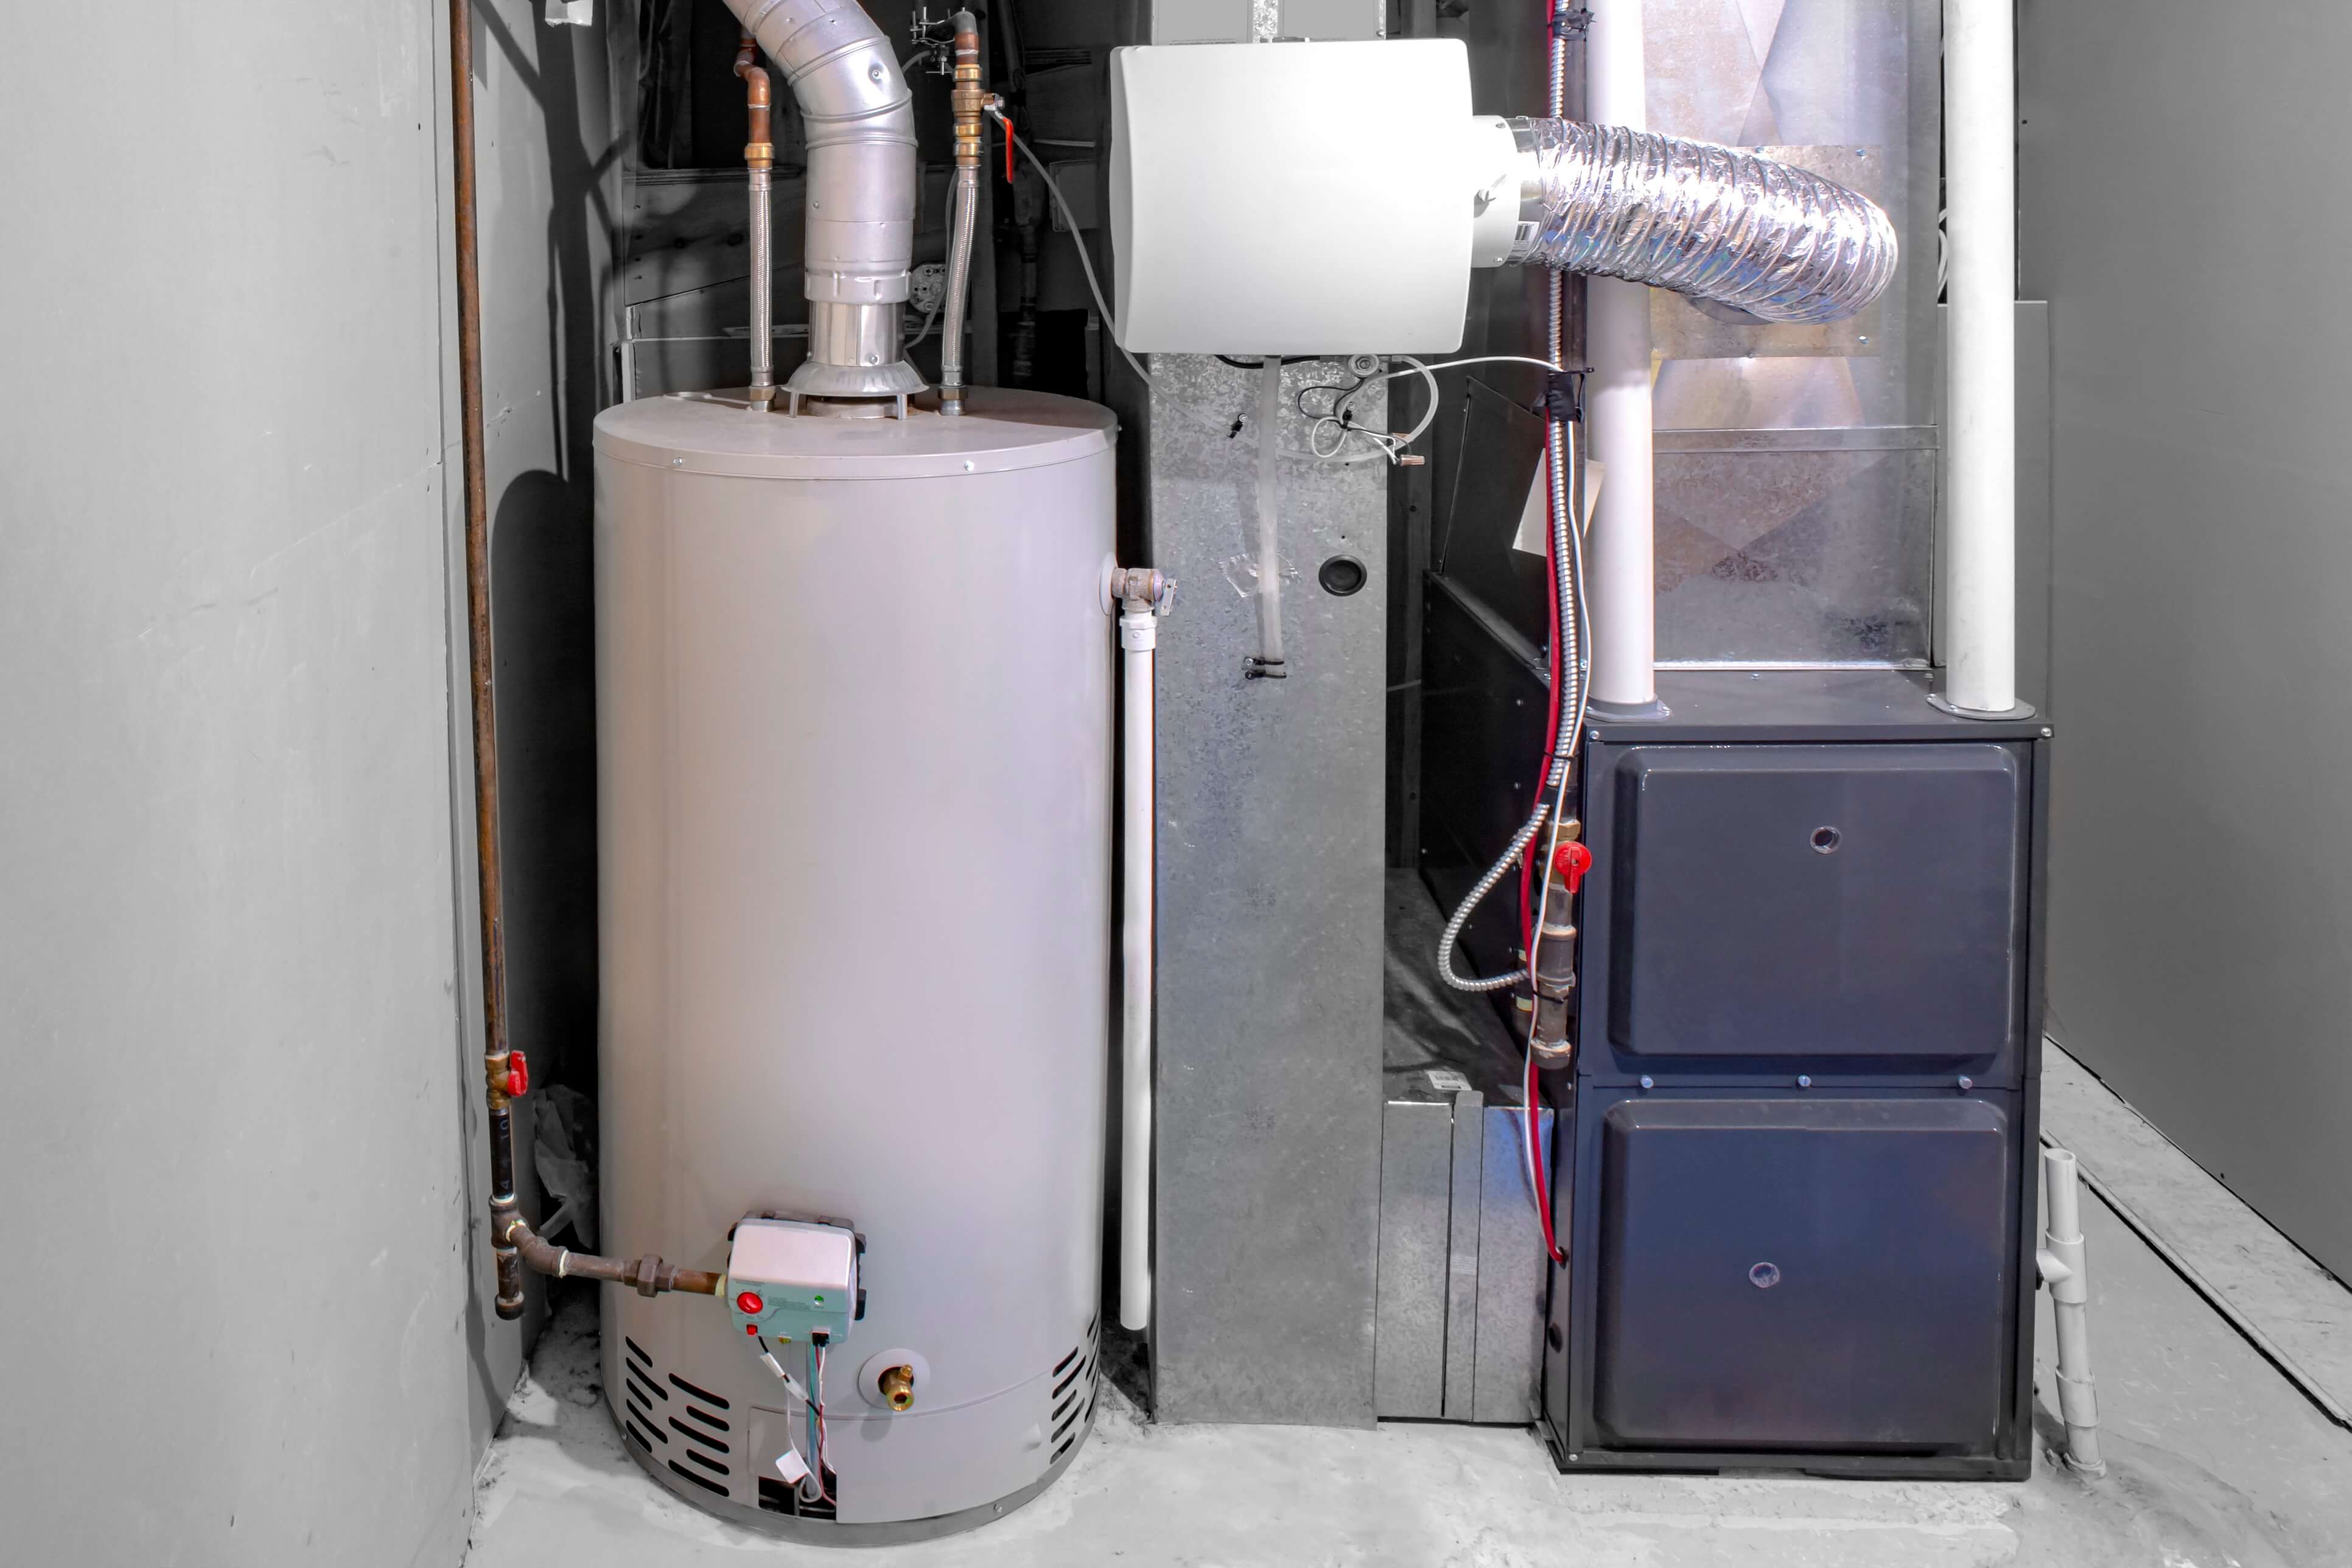 What You Need to Know About Financing Your Furnace Replacement or HVAC System Addition